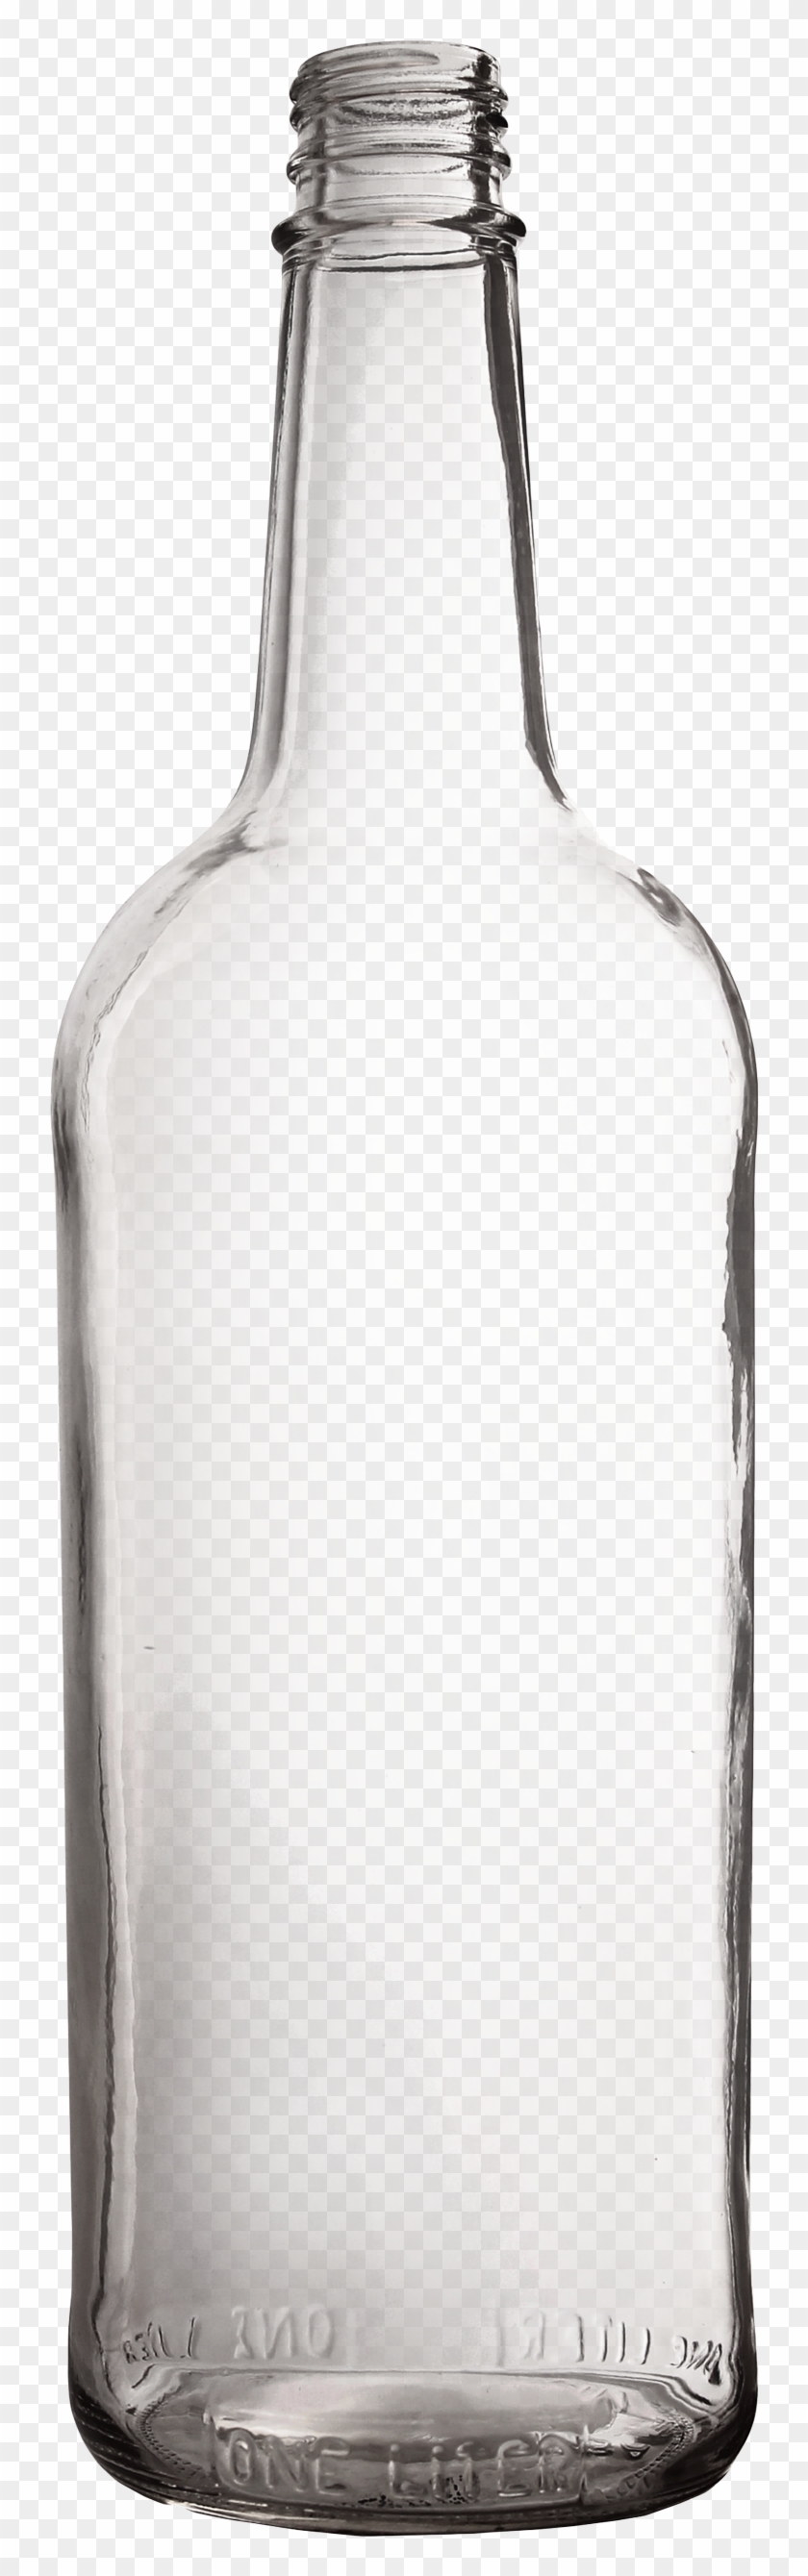 2200 X 2879 - Empty Whiskey Bottles Png Clipart #271376